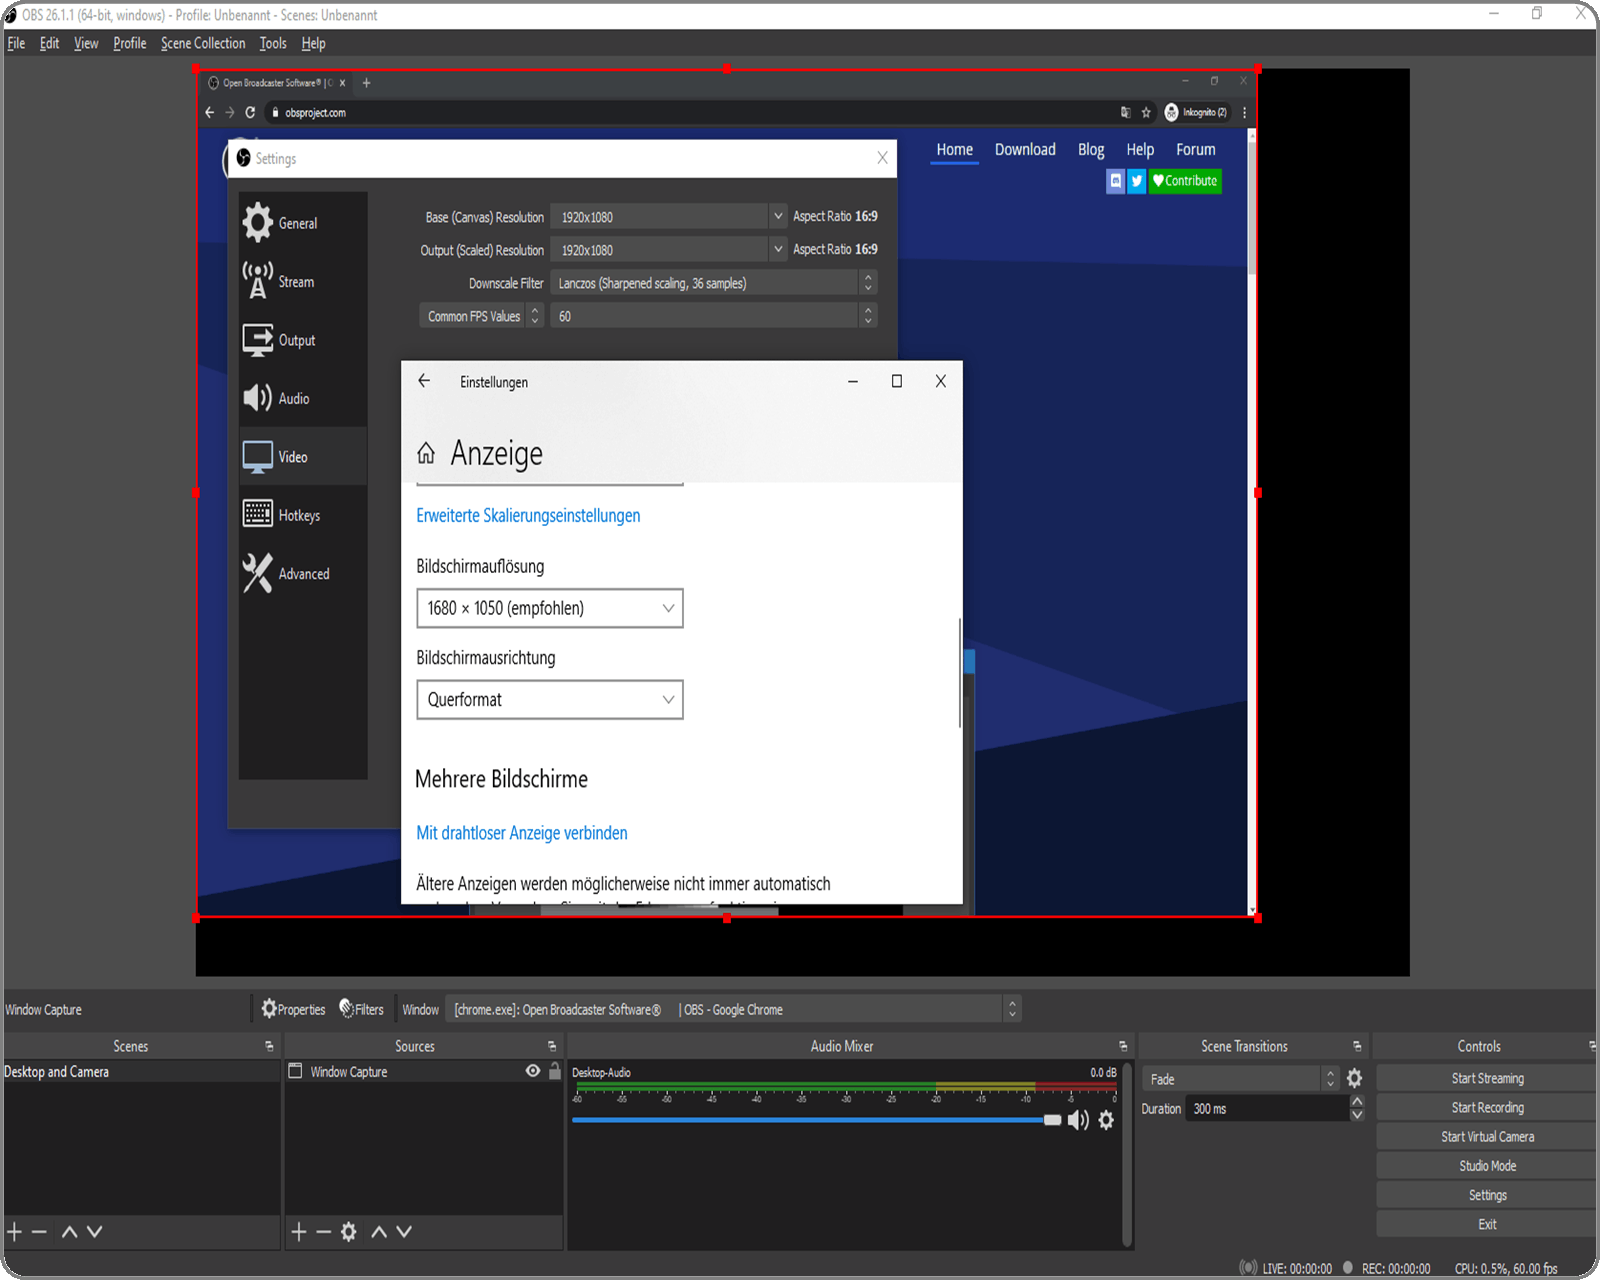 obs_10_settings_video_resolutions_black_stripes.png